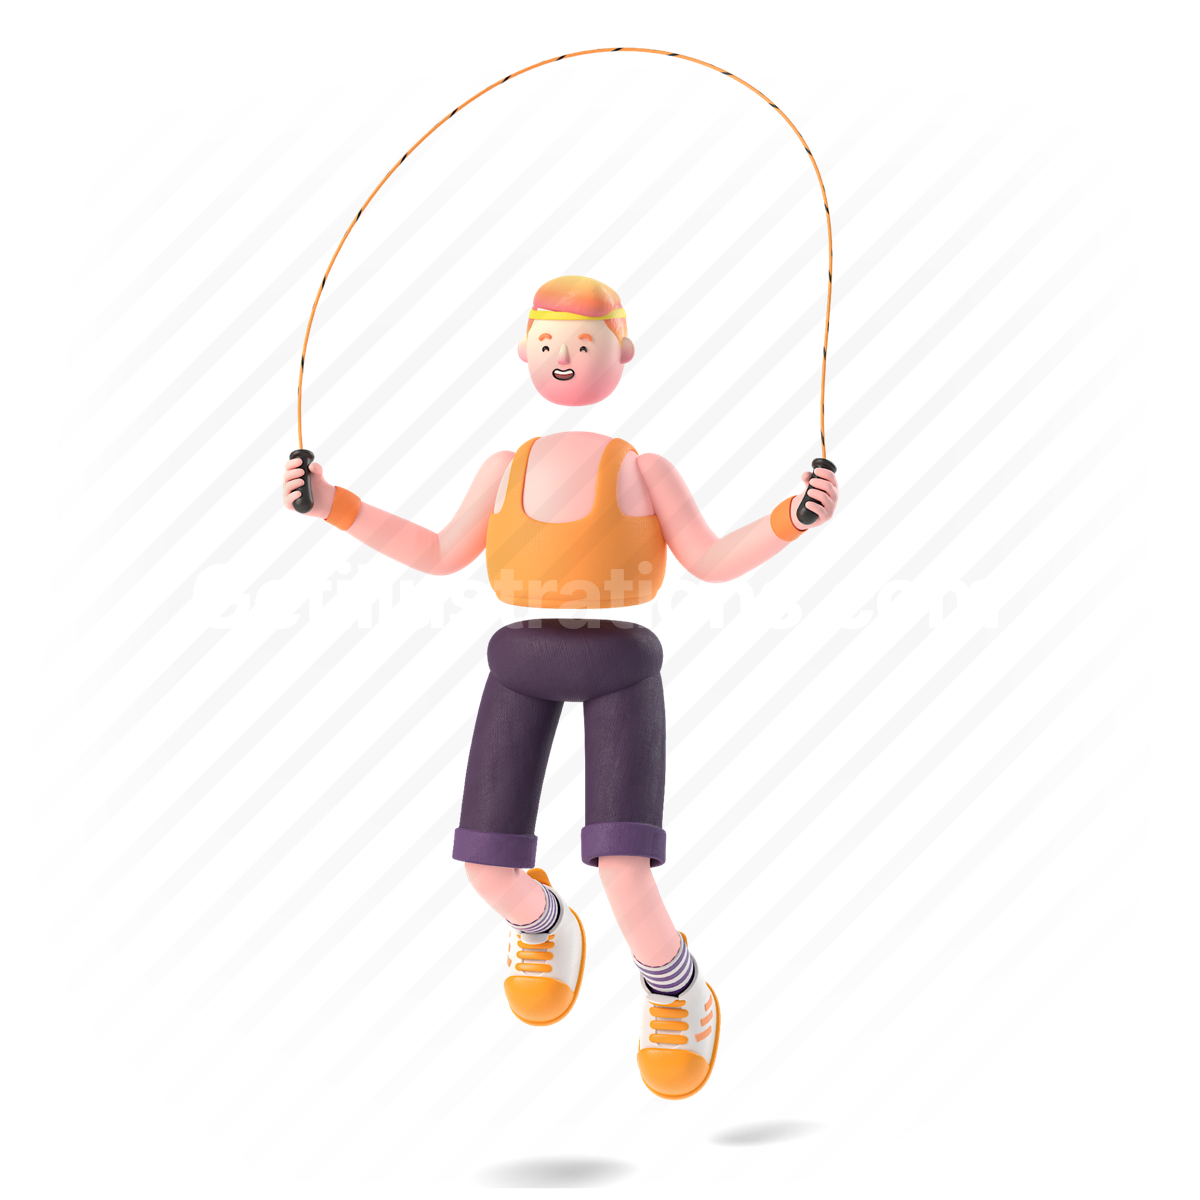 3d, people, person, character, fitness, jumprope, cardio, man